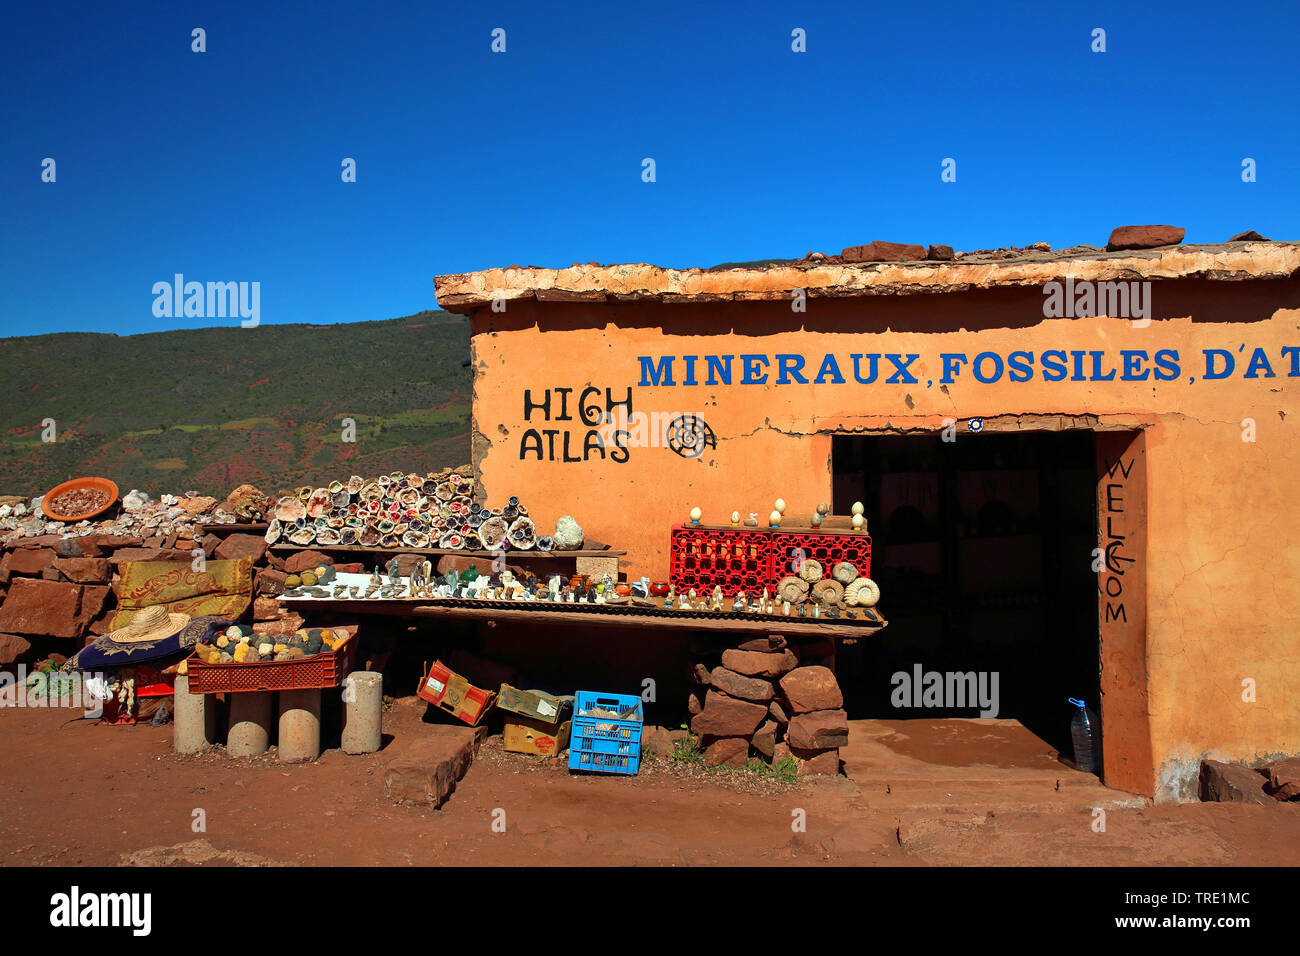 sale of minerals and fossils, Morocco, Tizi-n-Ait Imguer Stock Photo